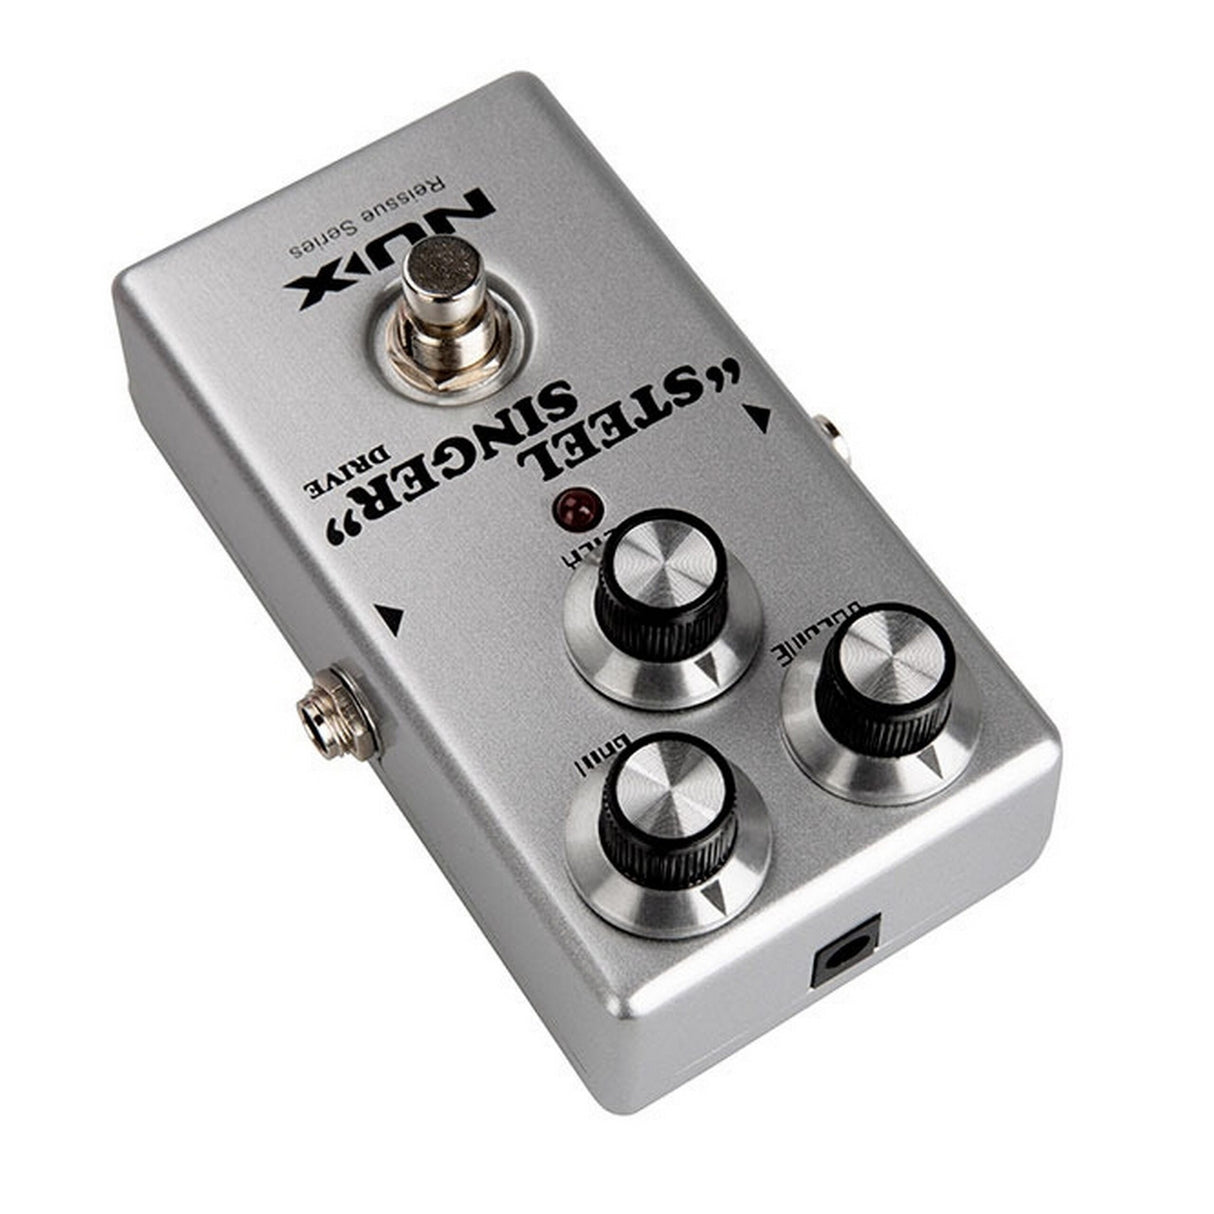 Nux Steel Singer Drive Overdrive Pedal